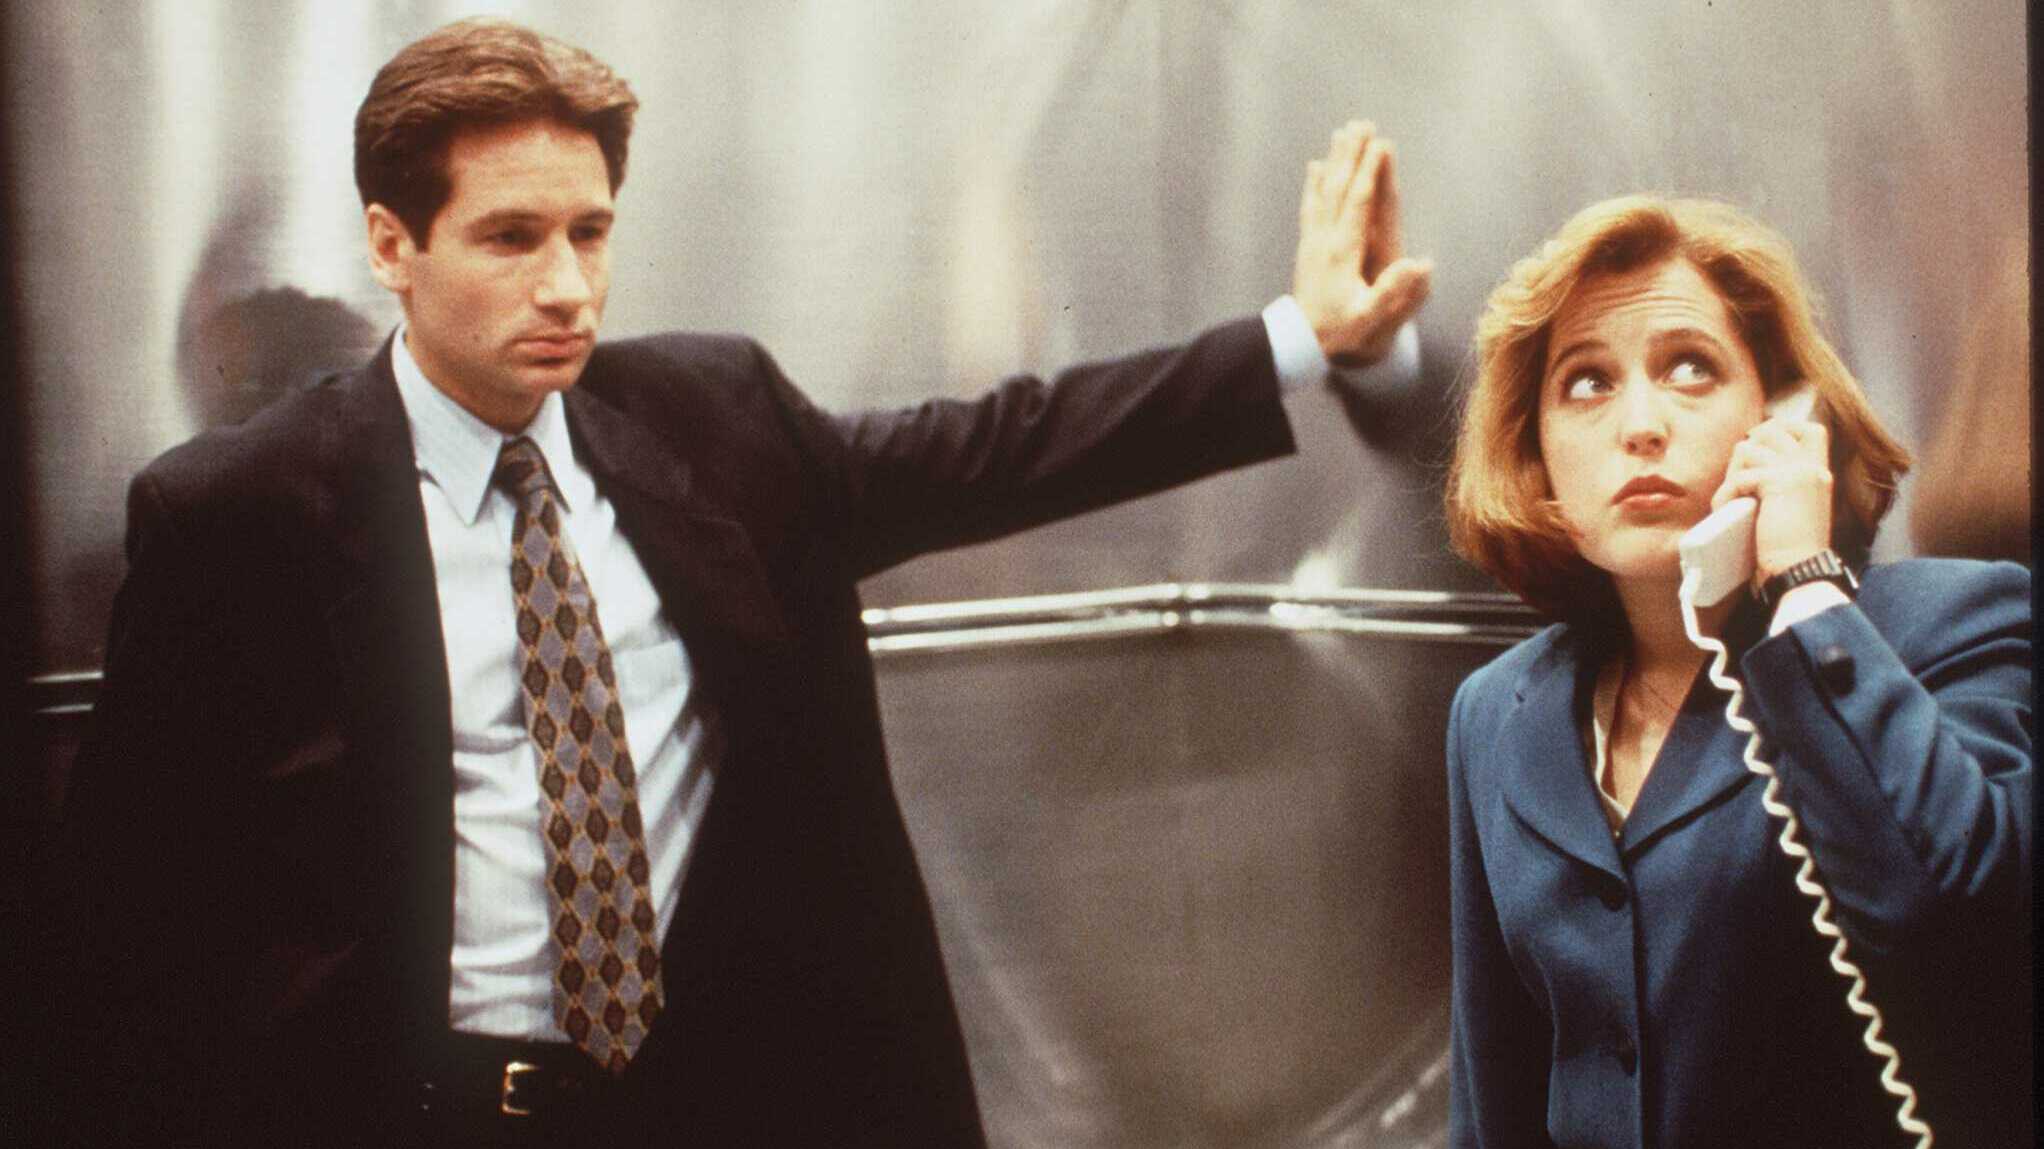 People have been searching for this song from ‘The X-Files’ for 25 years. Until now